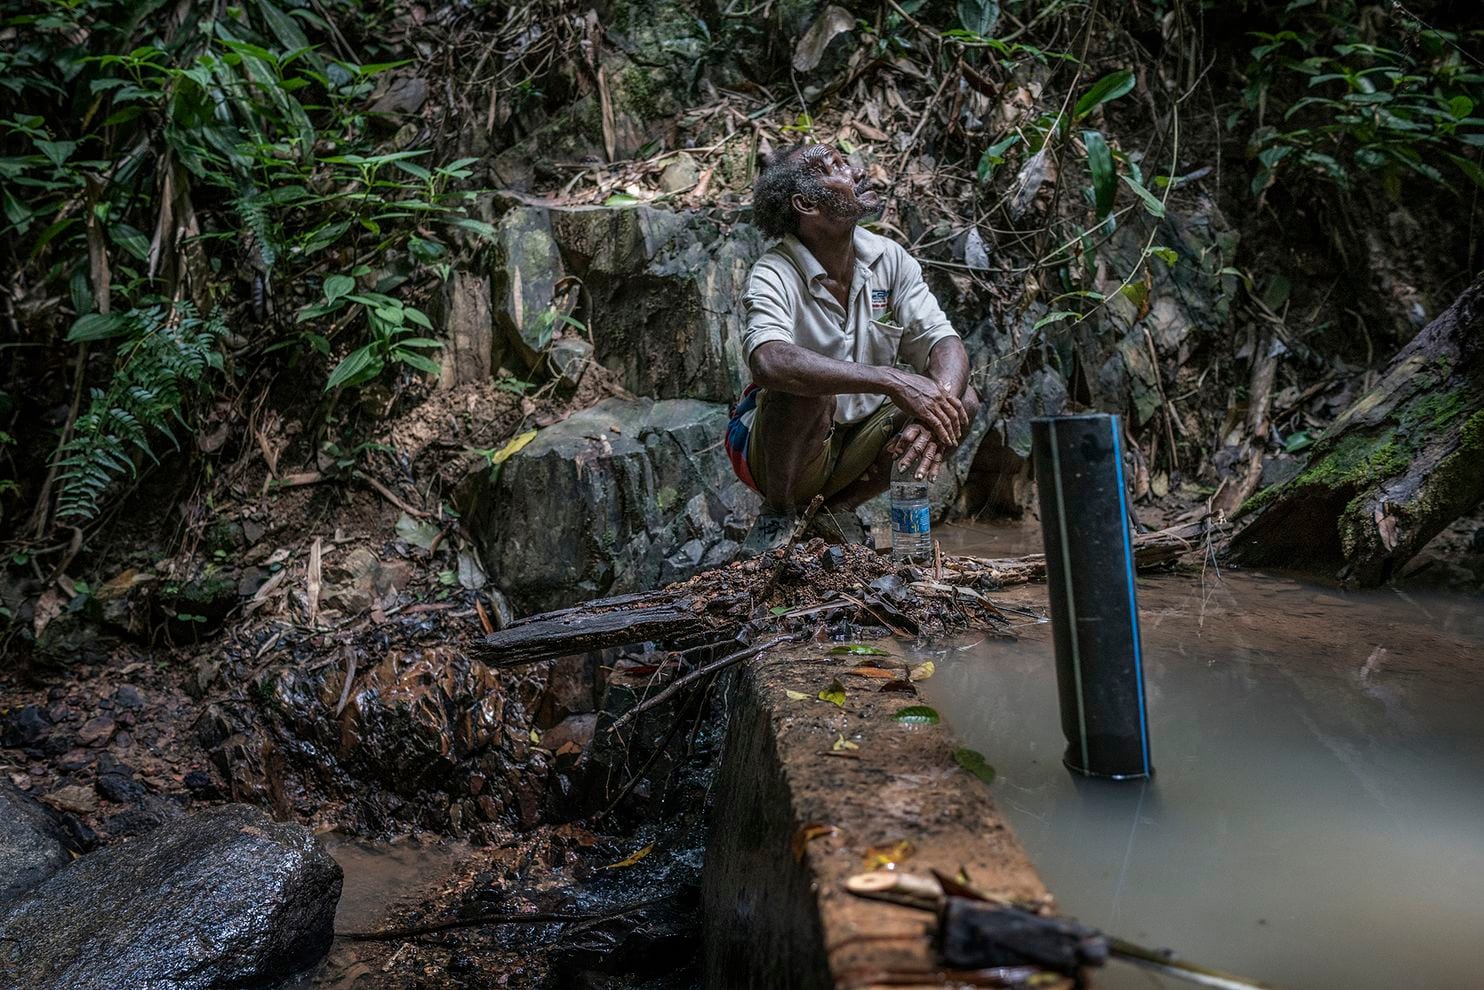 Life Of The Batek Under Threat Due To Toxic Runoff From Manganese Mines - WORLD OF BUZZ 2